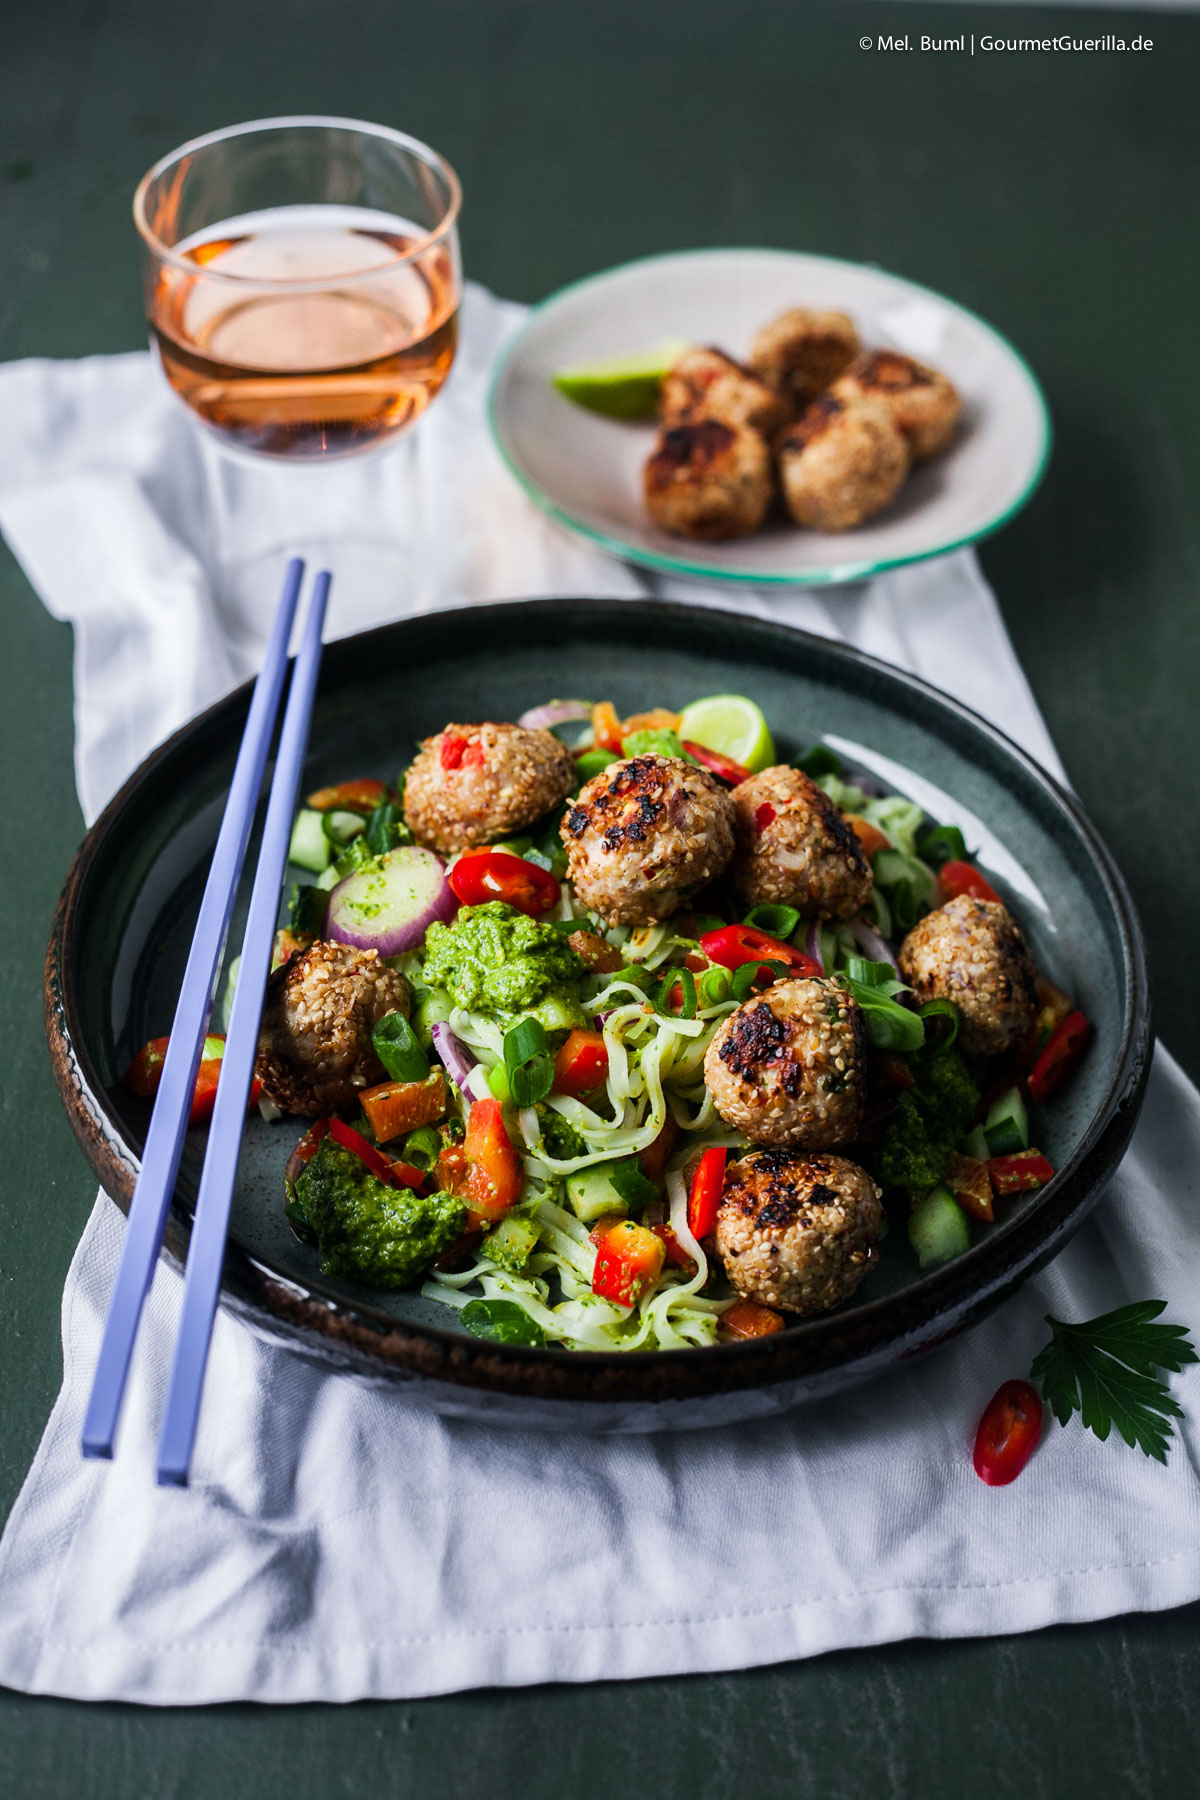 Summery rice noodle salad with Asia pesto and poultry chips | GourmetGuerilla .com 